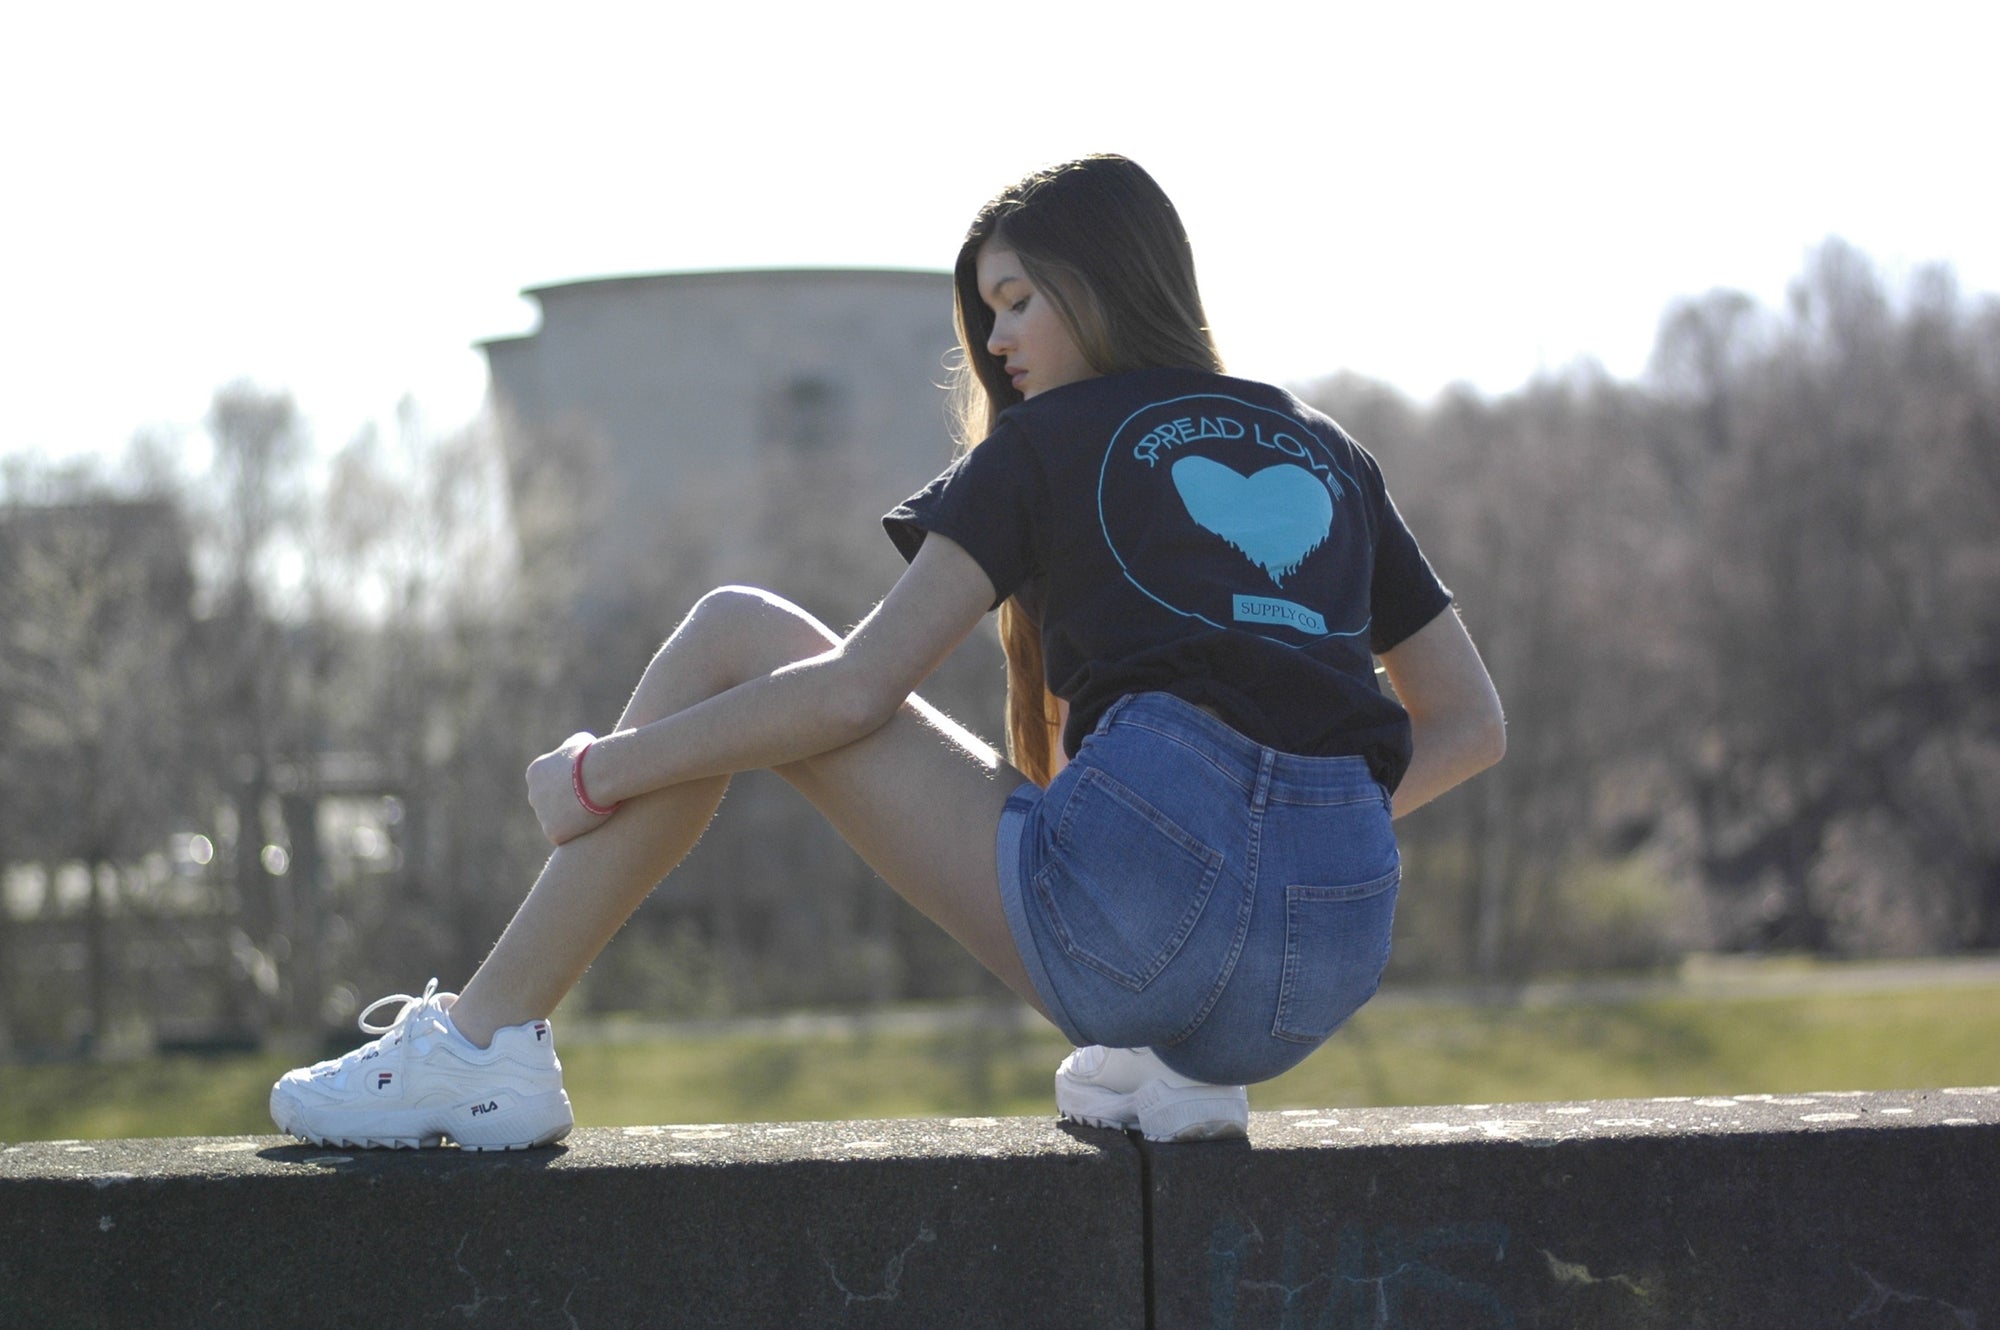 Spread Love Classic Graphic Tee (Black & Teal)